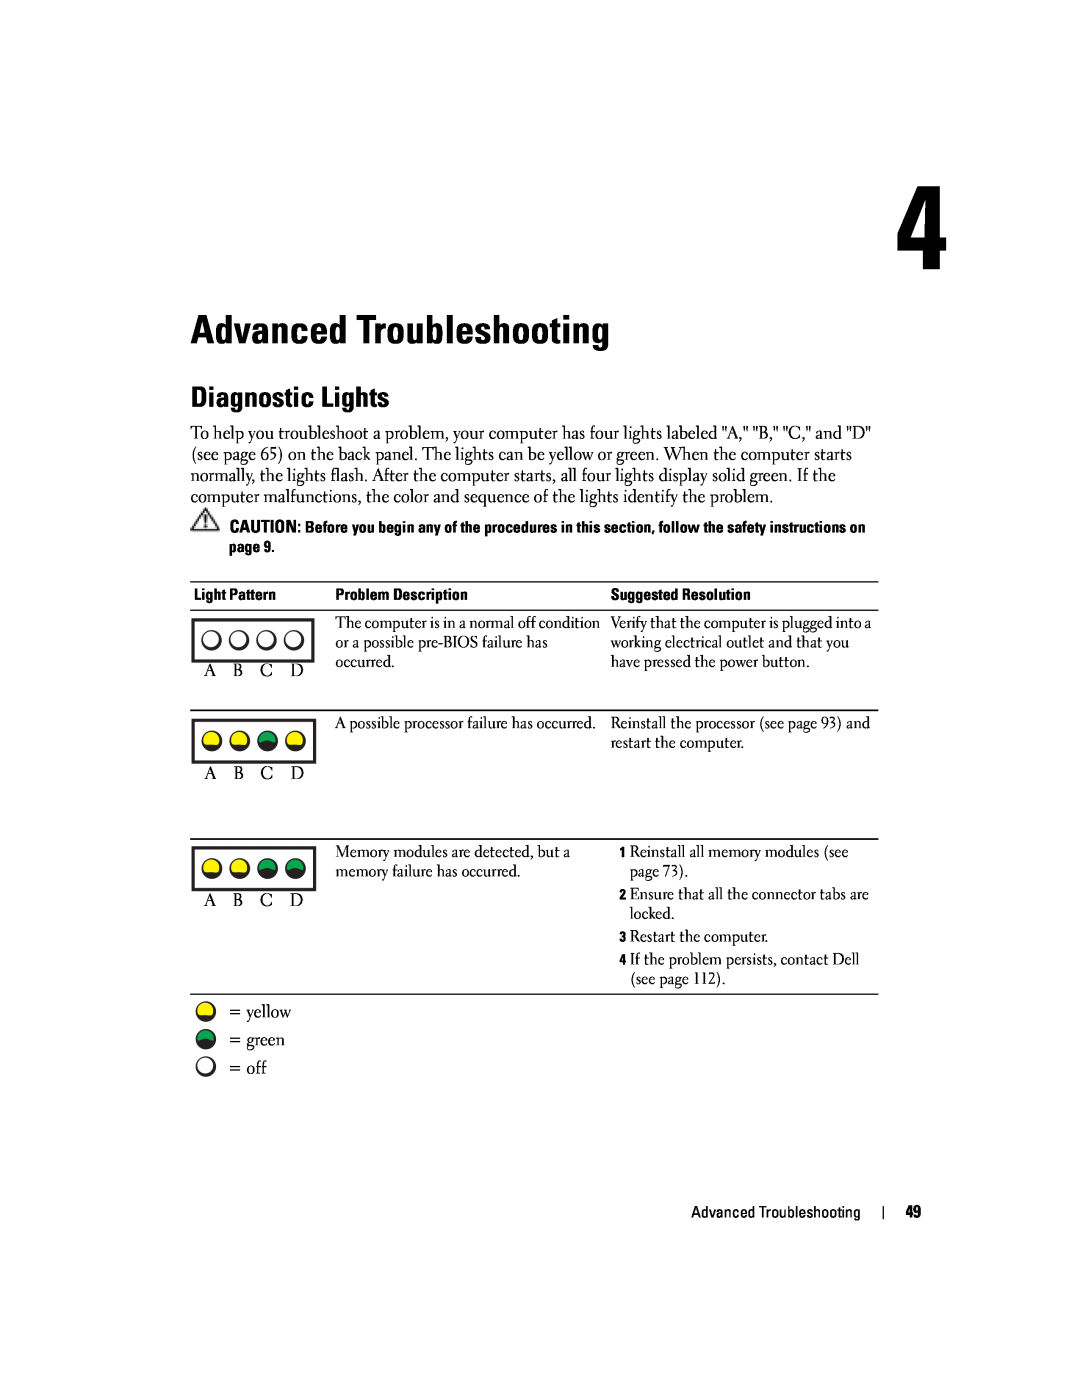 Dell XPS manual Advanced Troubleshooting, Diagnostic Lights 